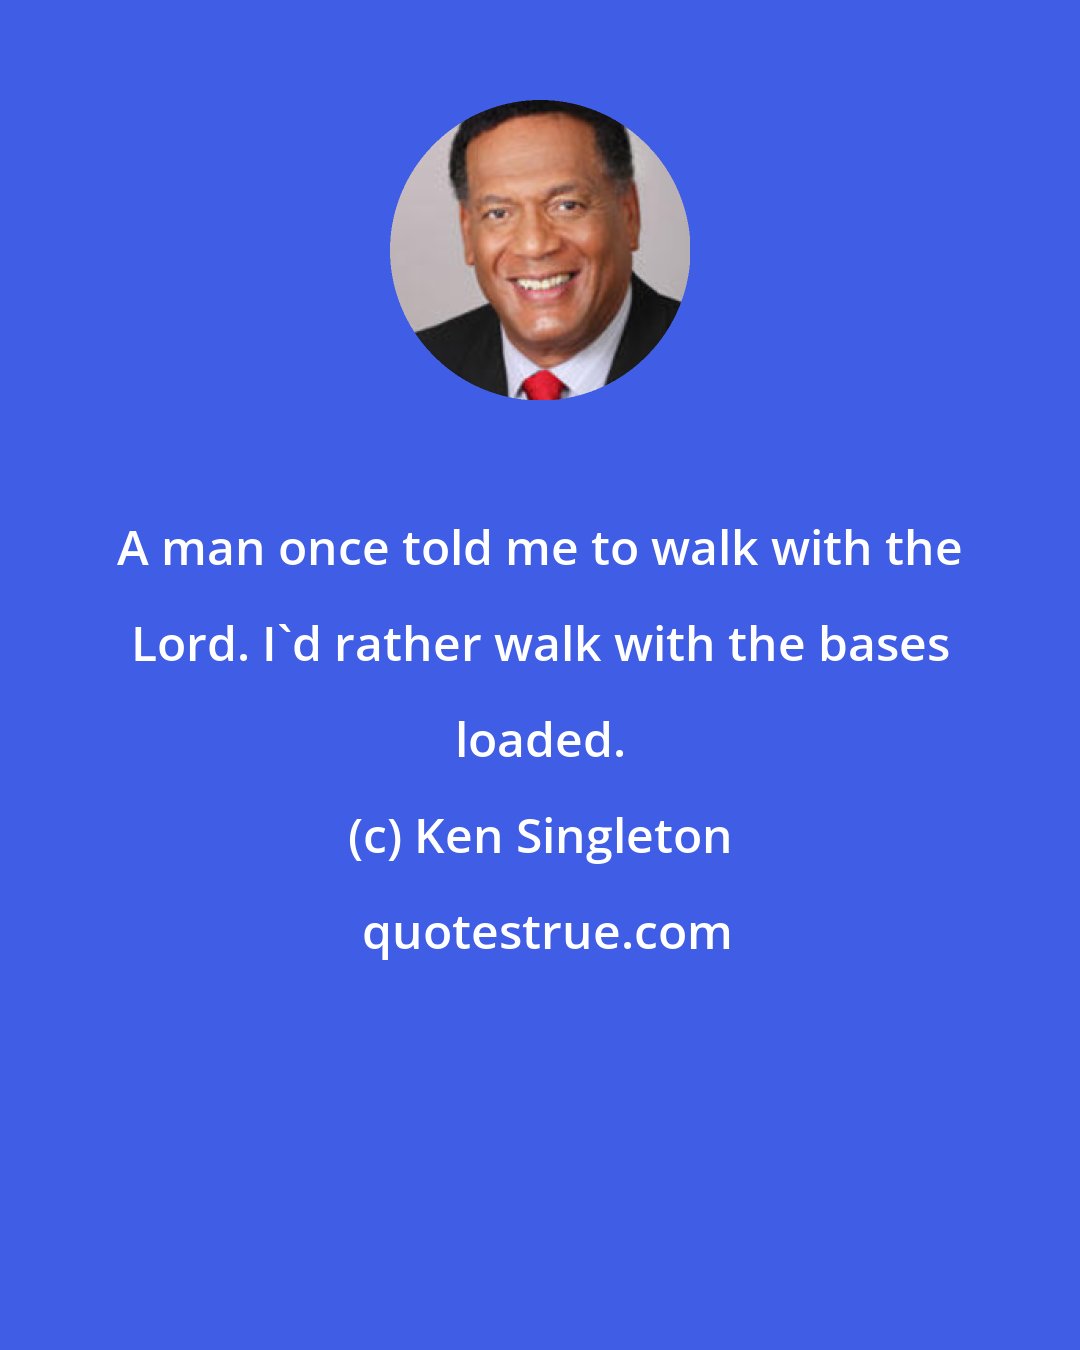 Ken Singleton: A man once told me to walk with the Lord. I'd rather walk with the bases loaded.